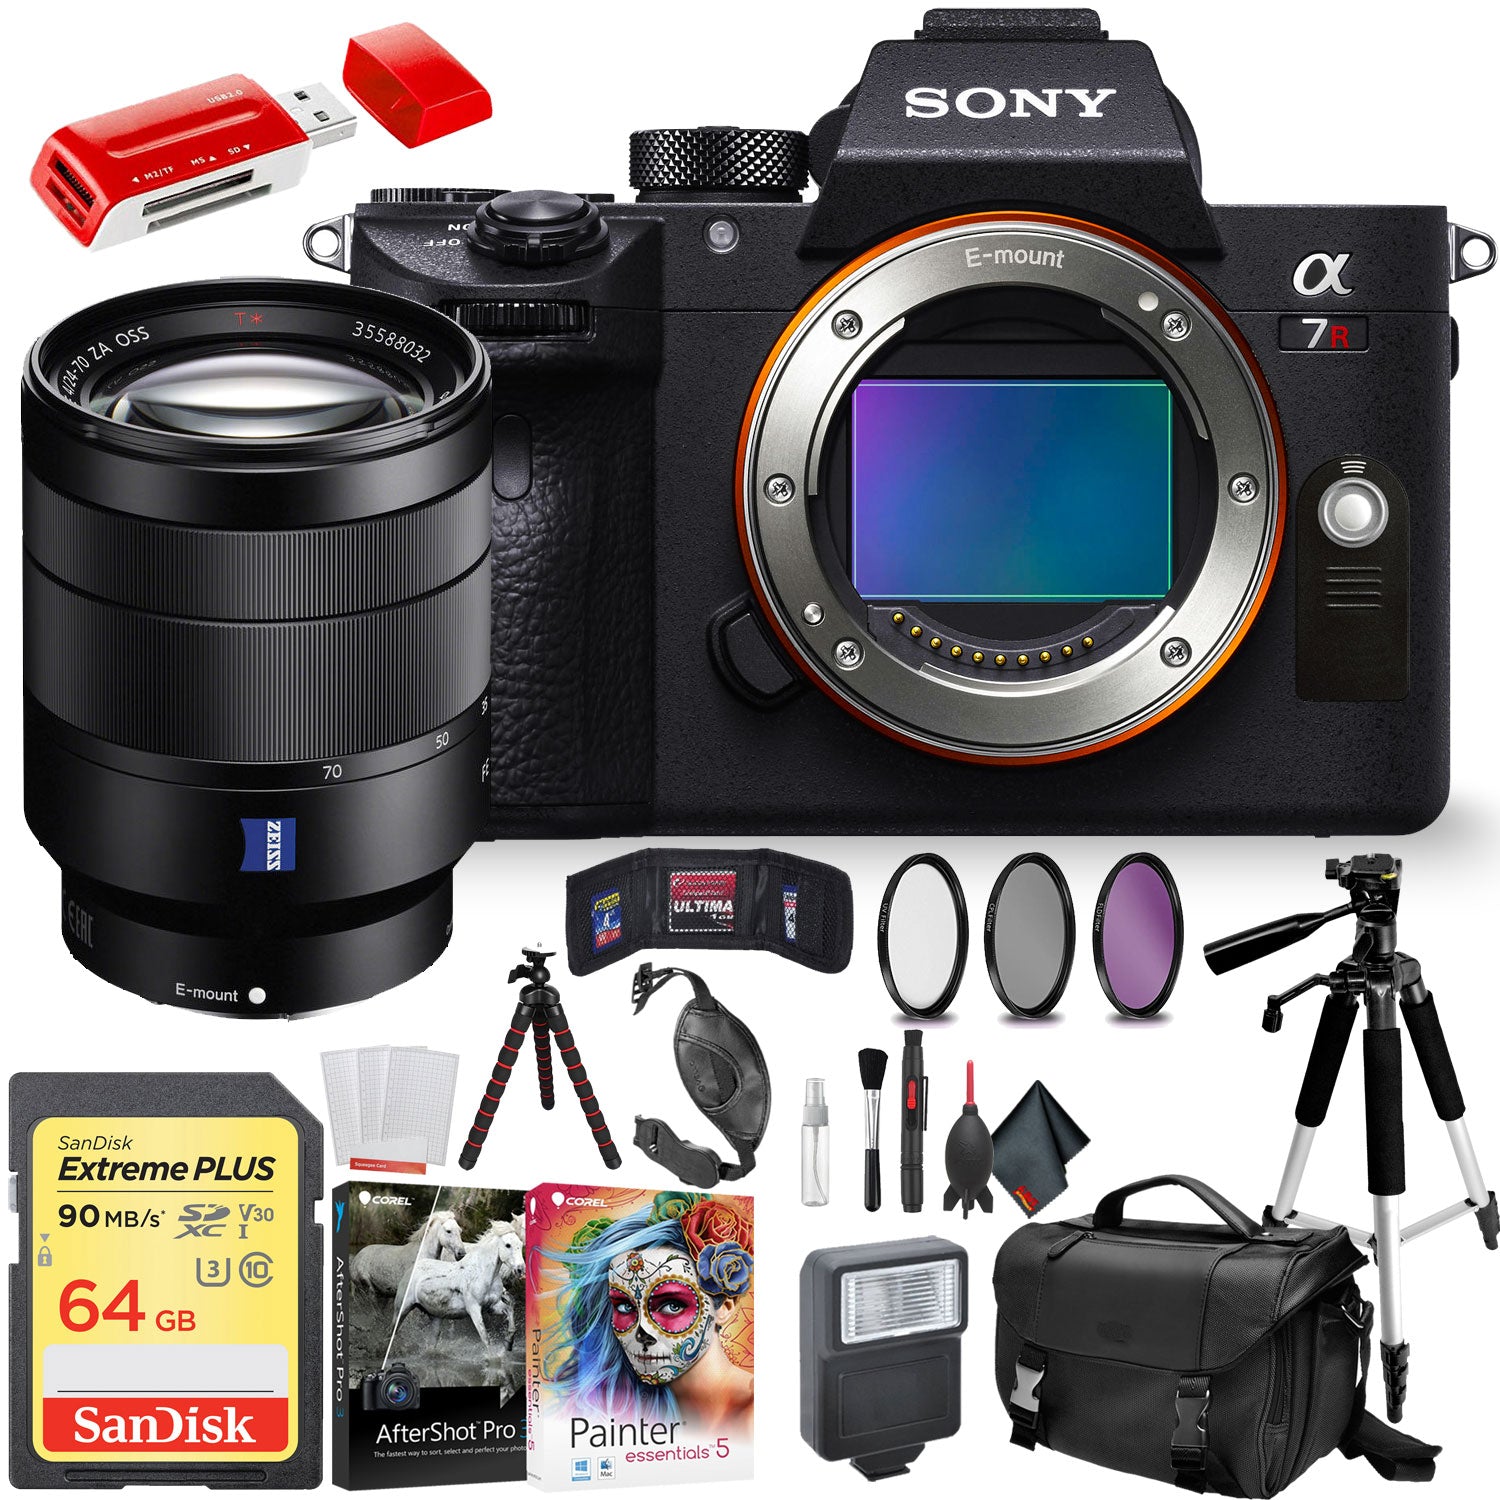 Sony Alpha a7R III Mirrorless Digital Camera Sony 24-70mm Lens and Accessories Combo